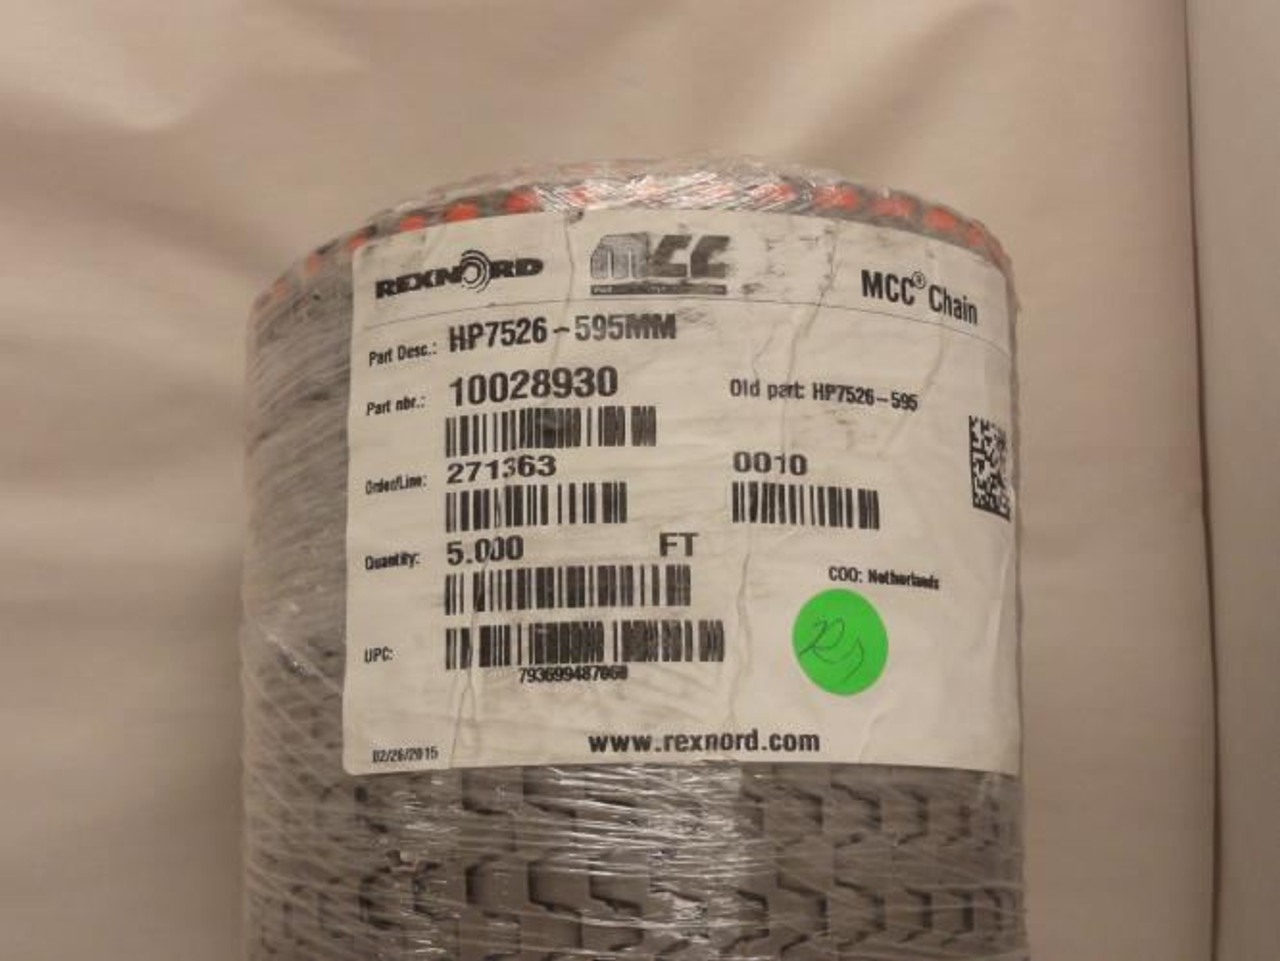 Rexnord HP7526-595MM; Flat Top Conveyor Chain 595mm Wide